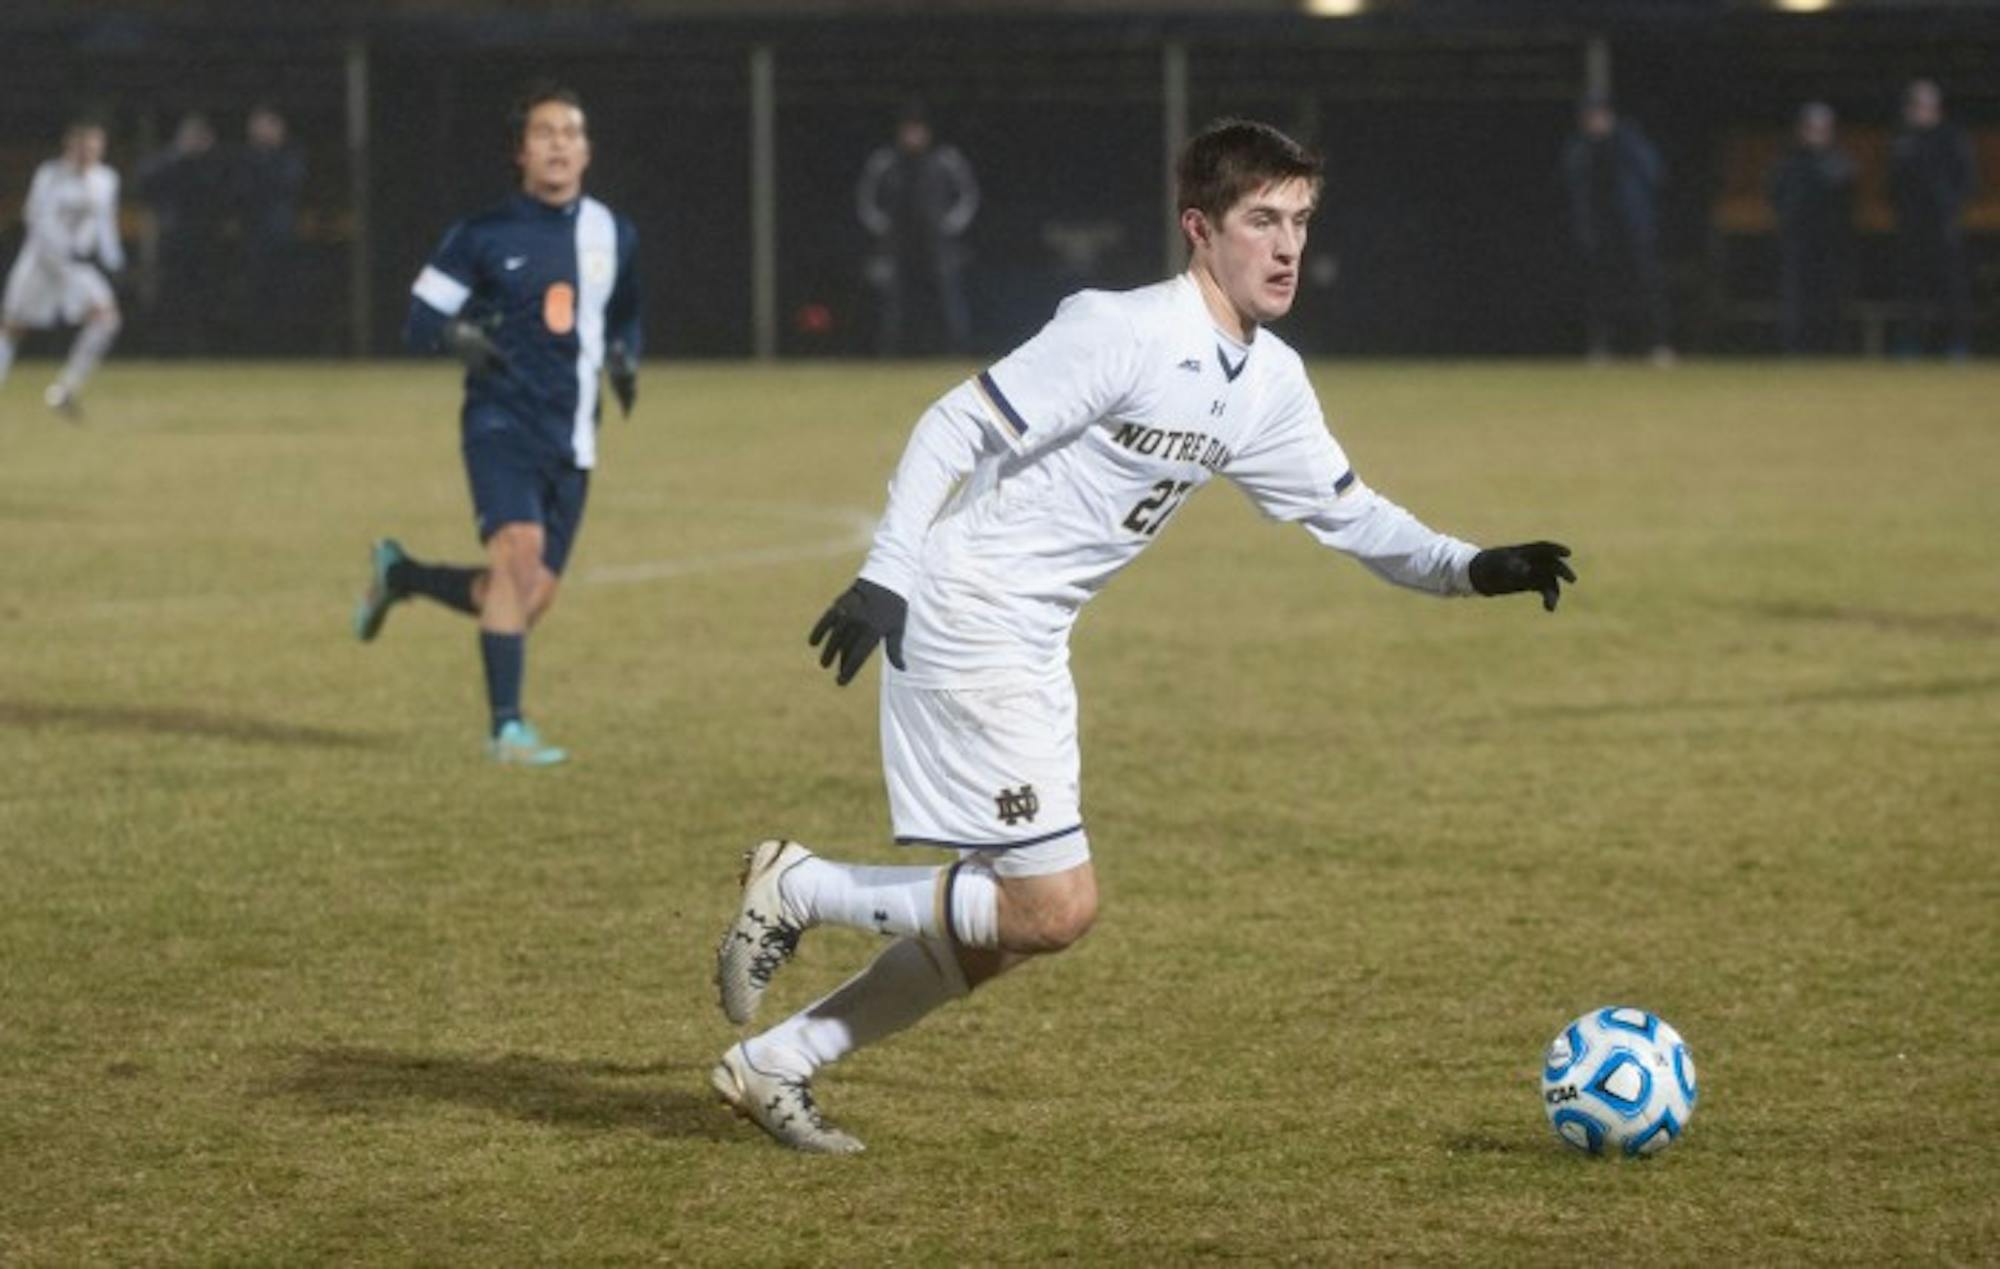 Senior midfieler Patrick Hodan dribbles the ball in the Notre Dame’s 1-0 loss to Virginia in the NCAA Championships on Nov. 30.